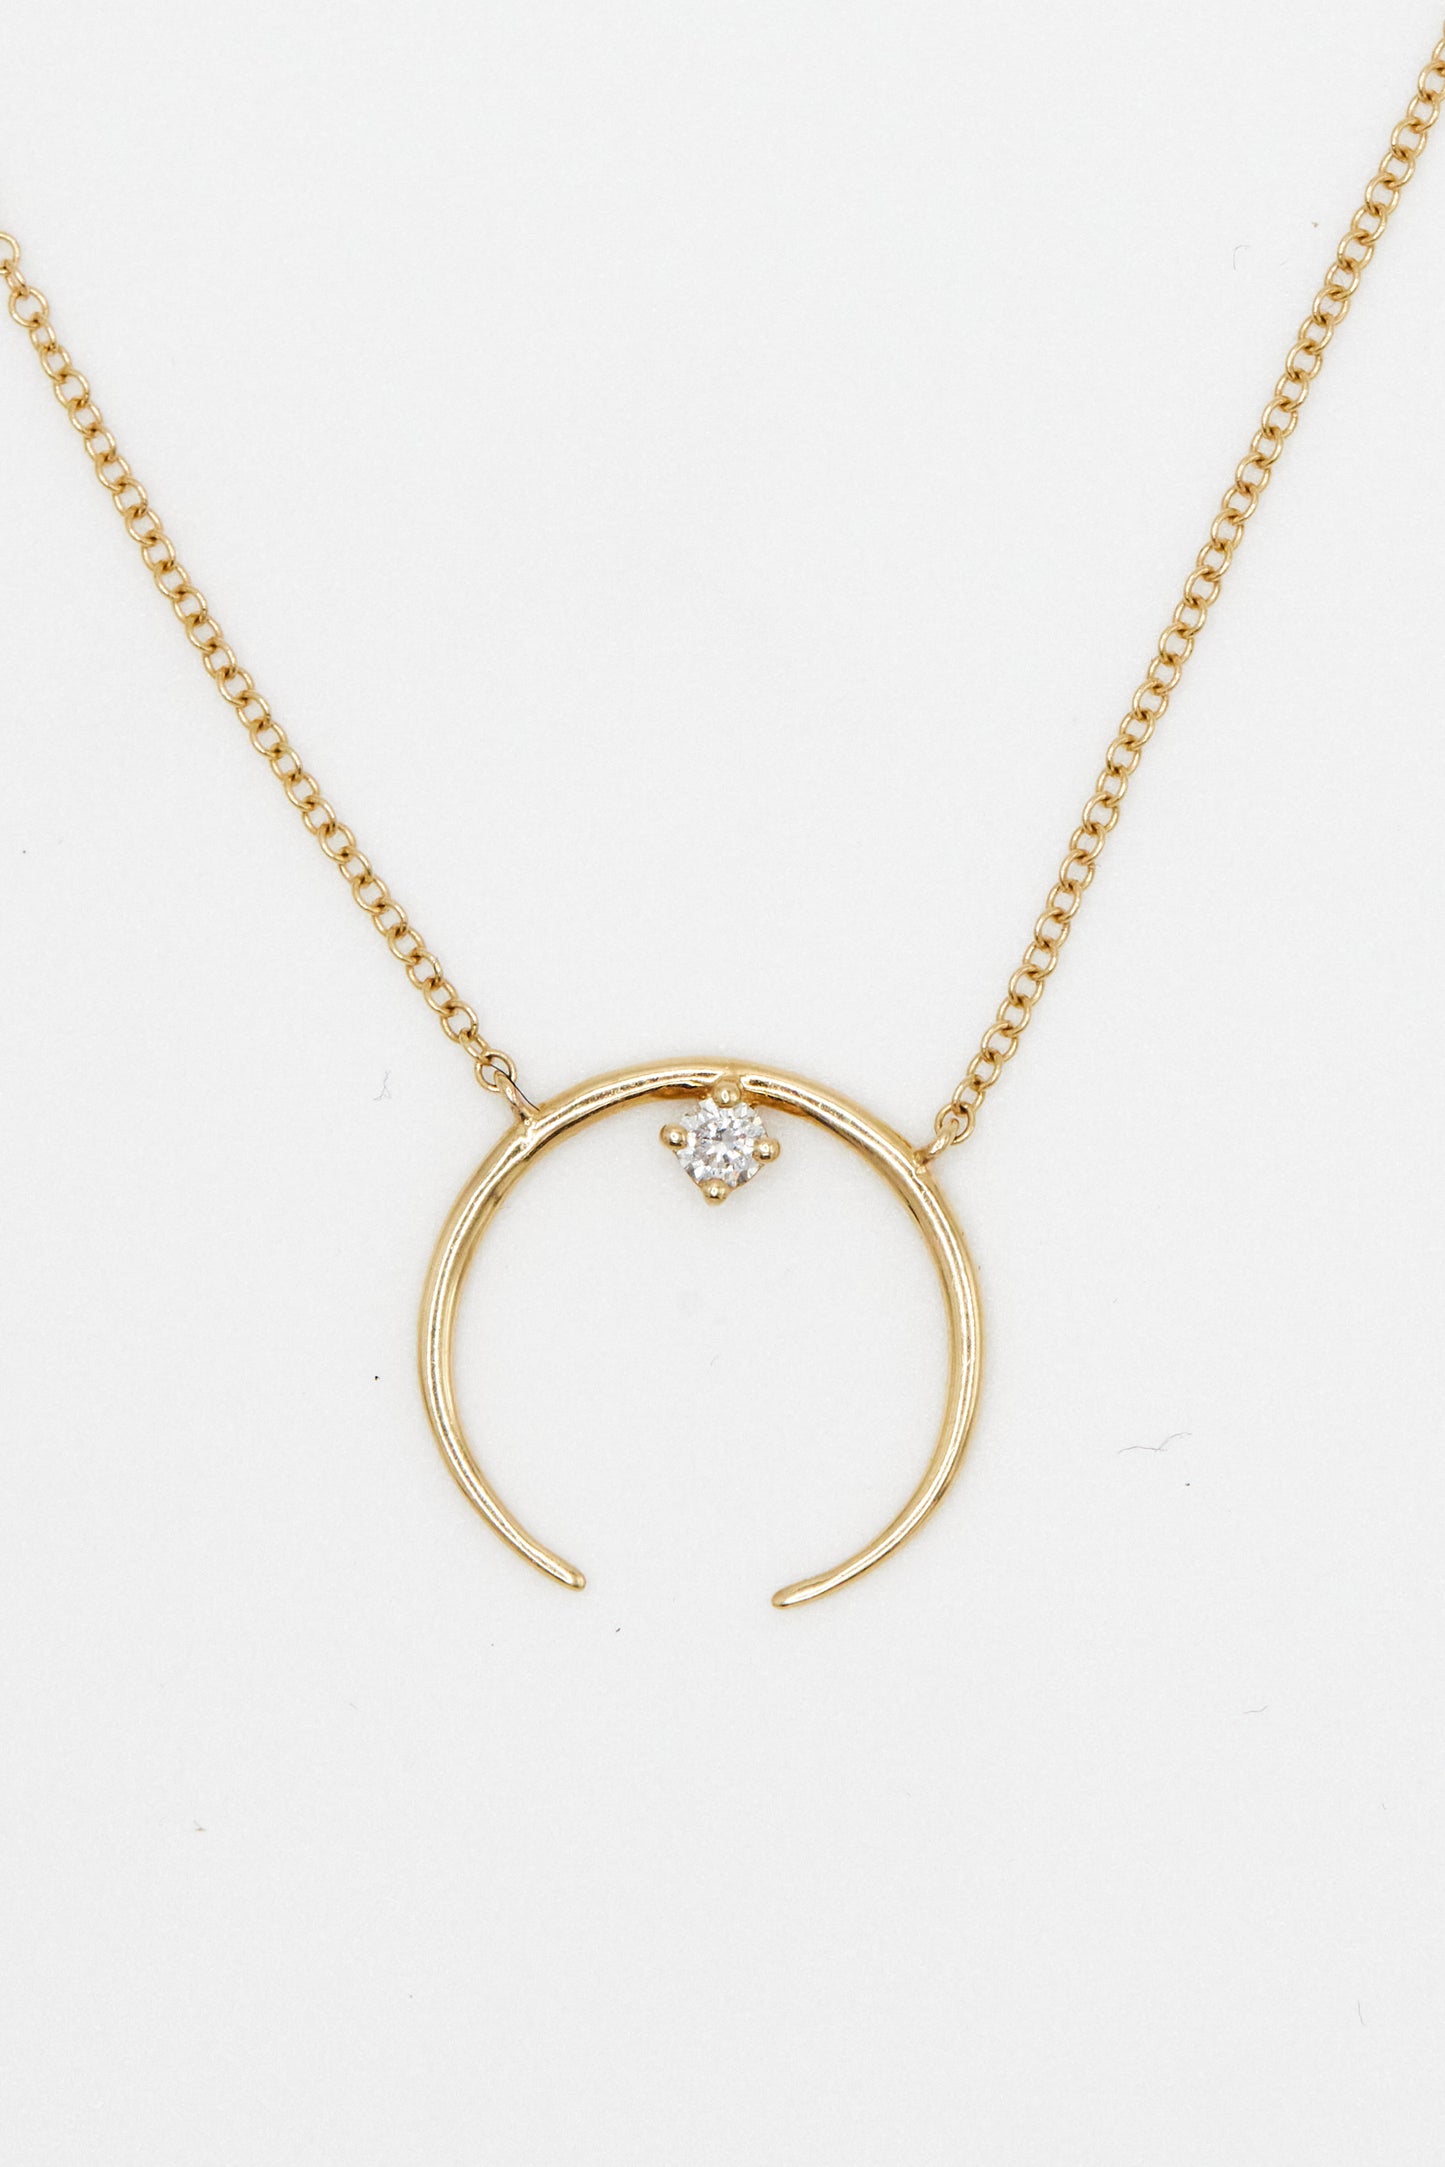 yellow gold open circle pendant necklace with white diamond accent on white background